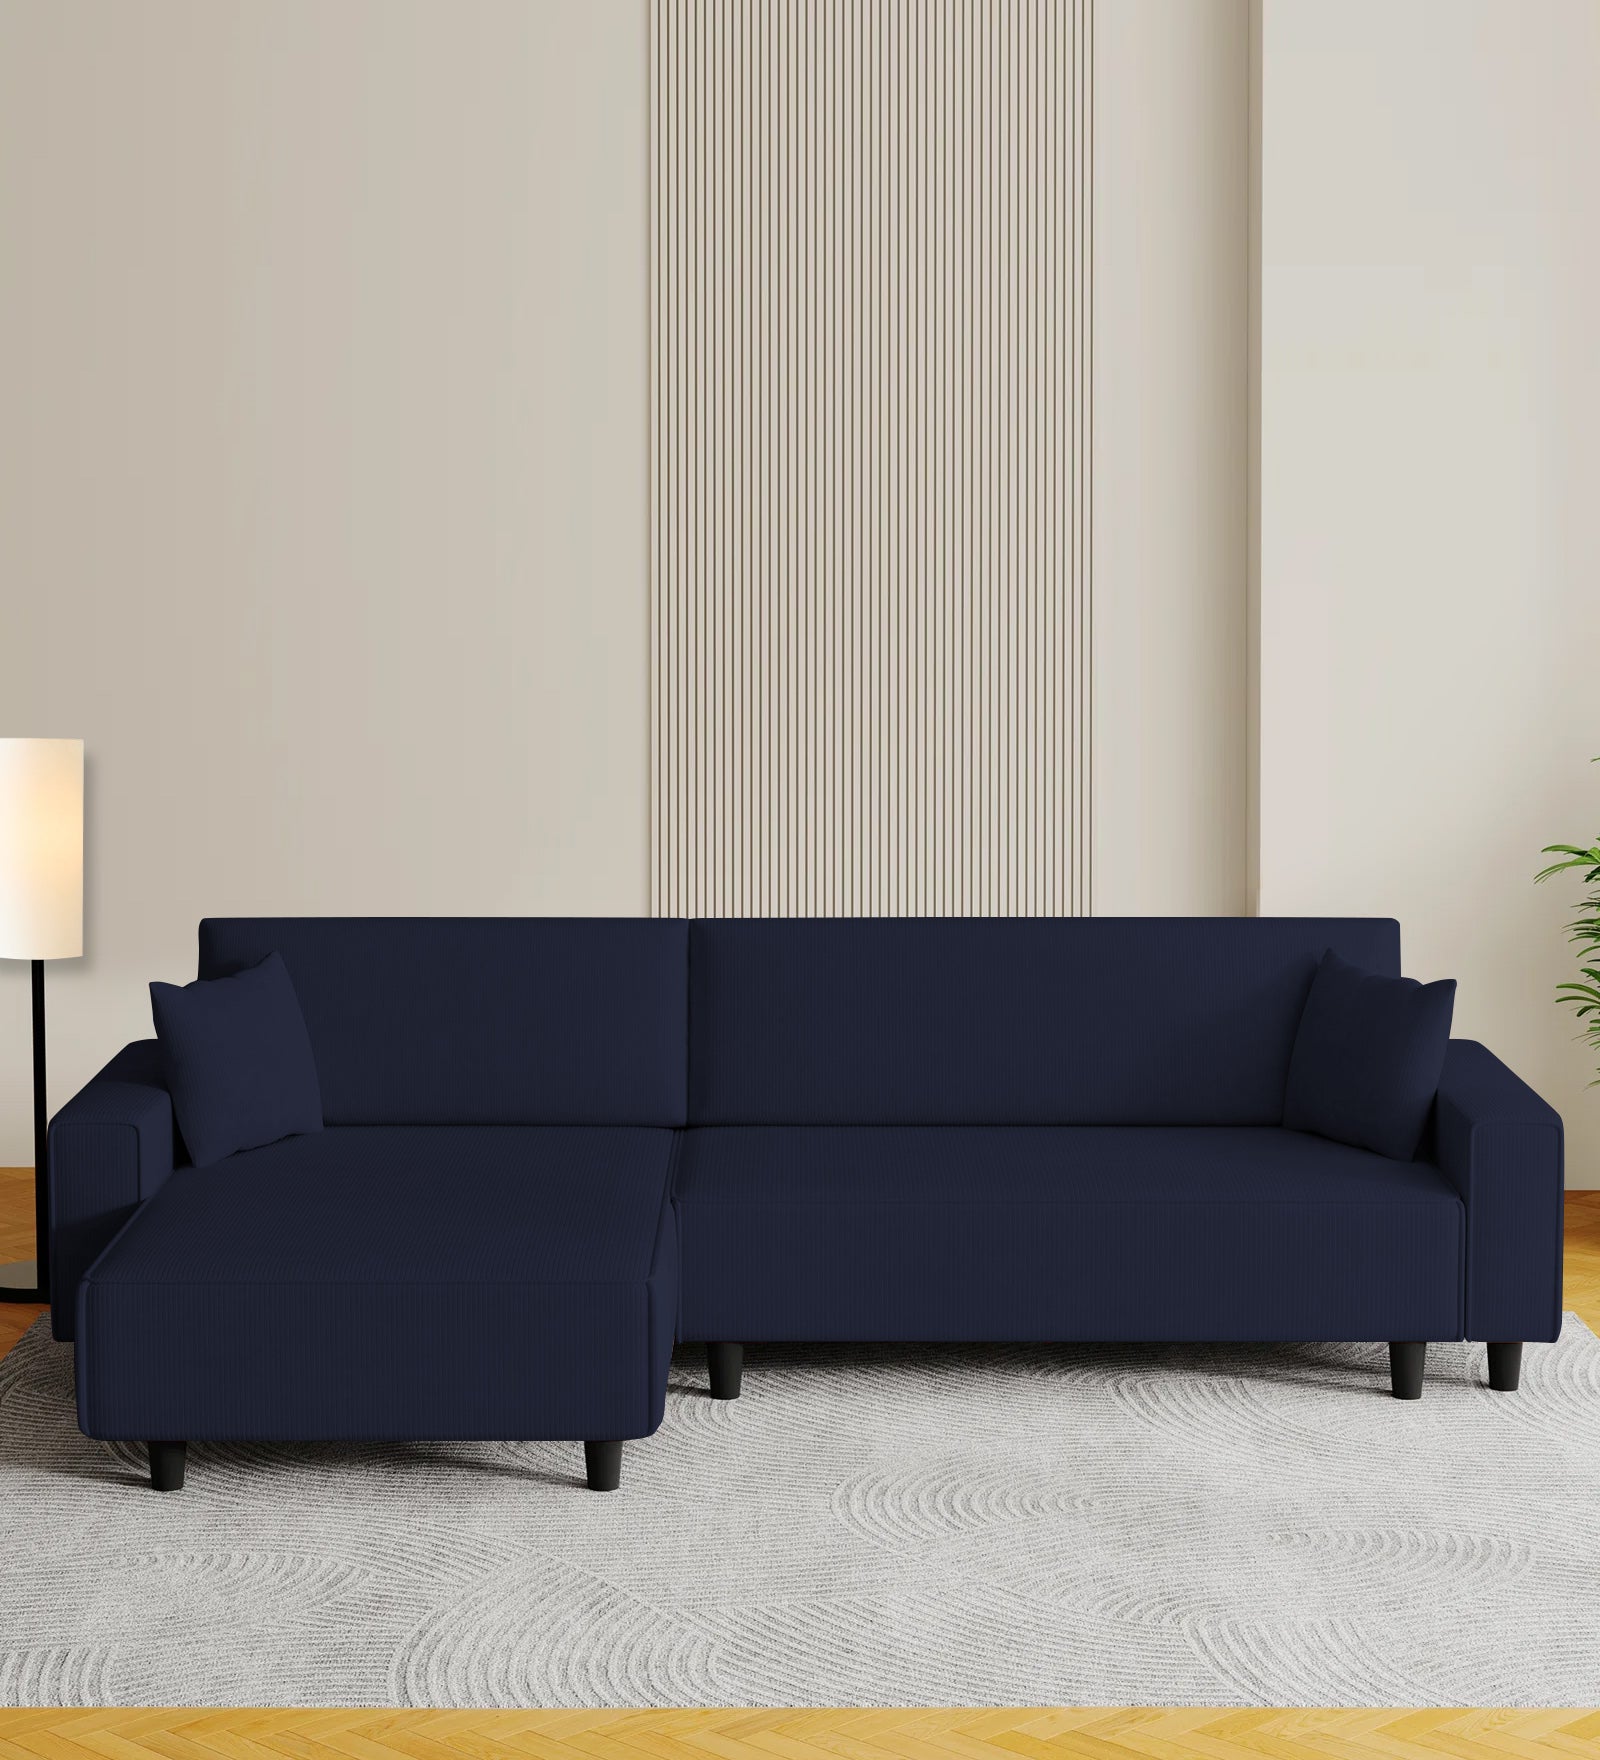 Peach Fabric RHS 6 Seater Sectional Sofa Cum Bed With Storage In Royal Blue Colour